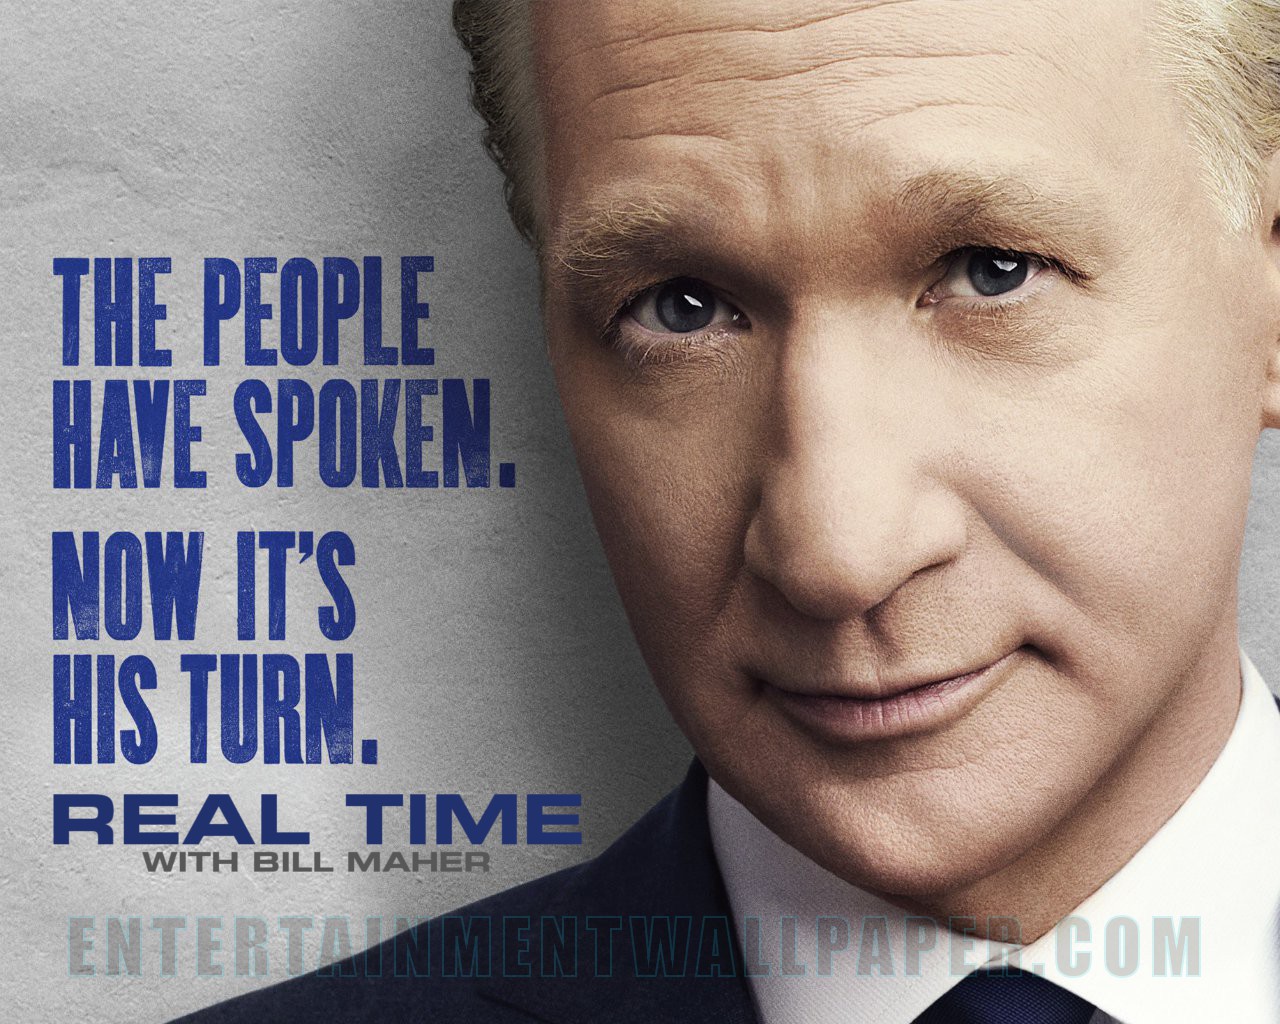 Real Time with Bill Maher Wallpaper - Original size, download now.